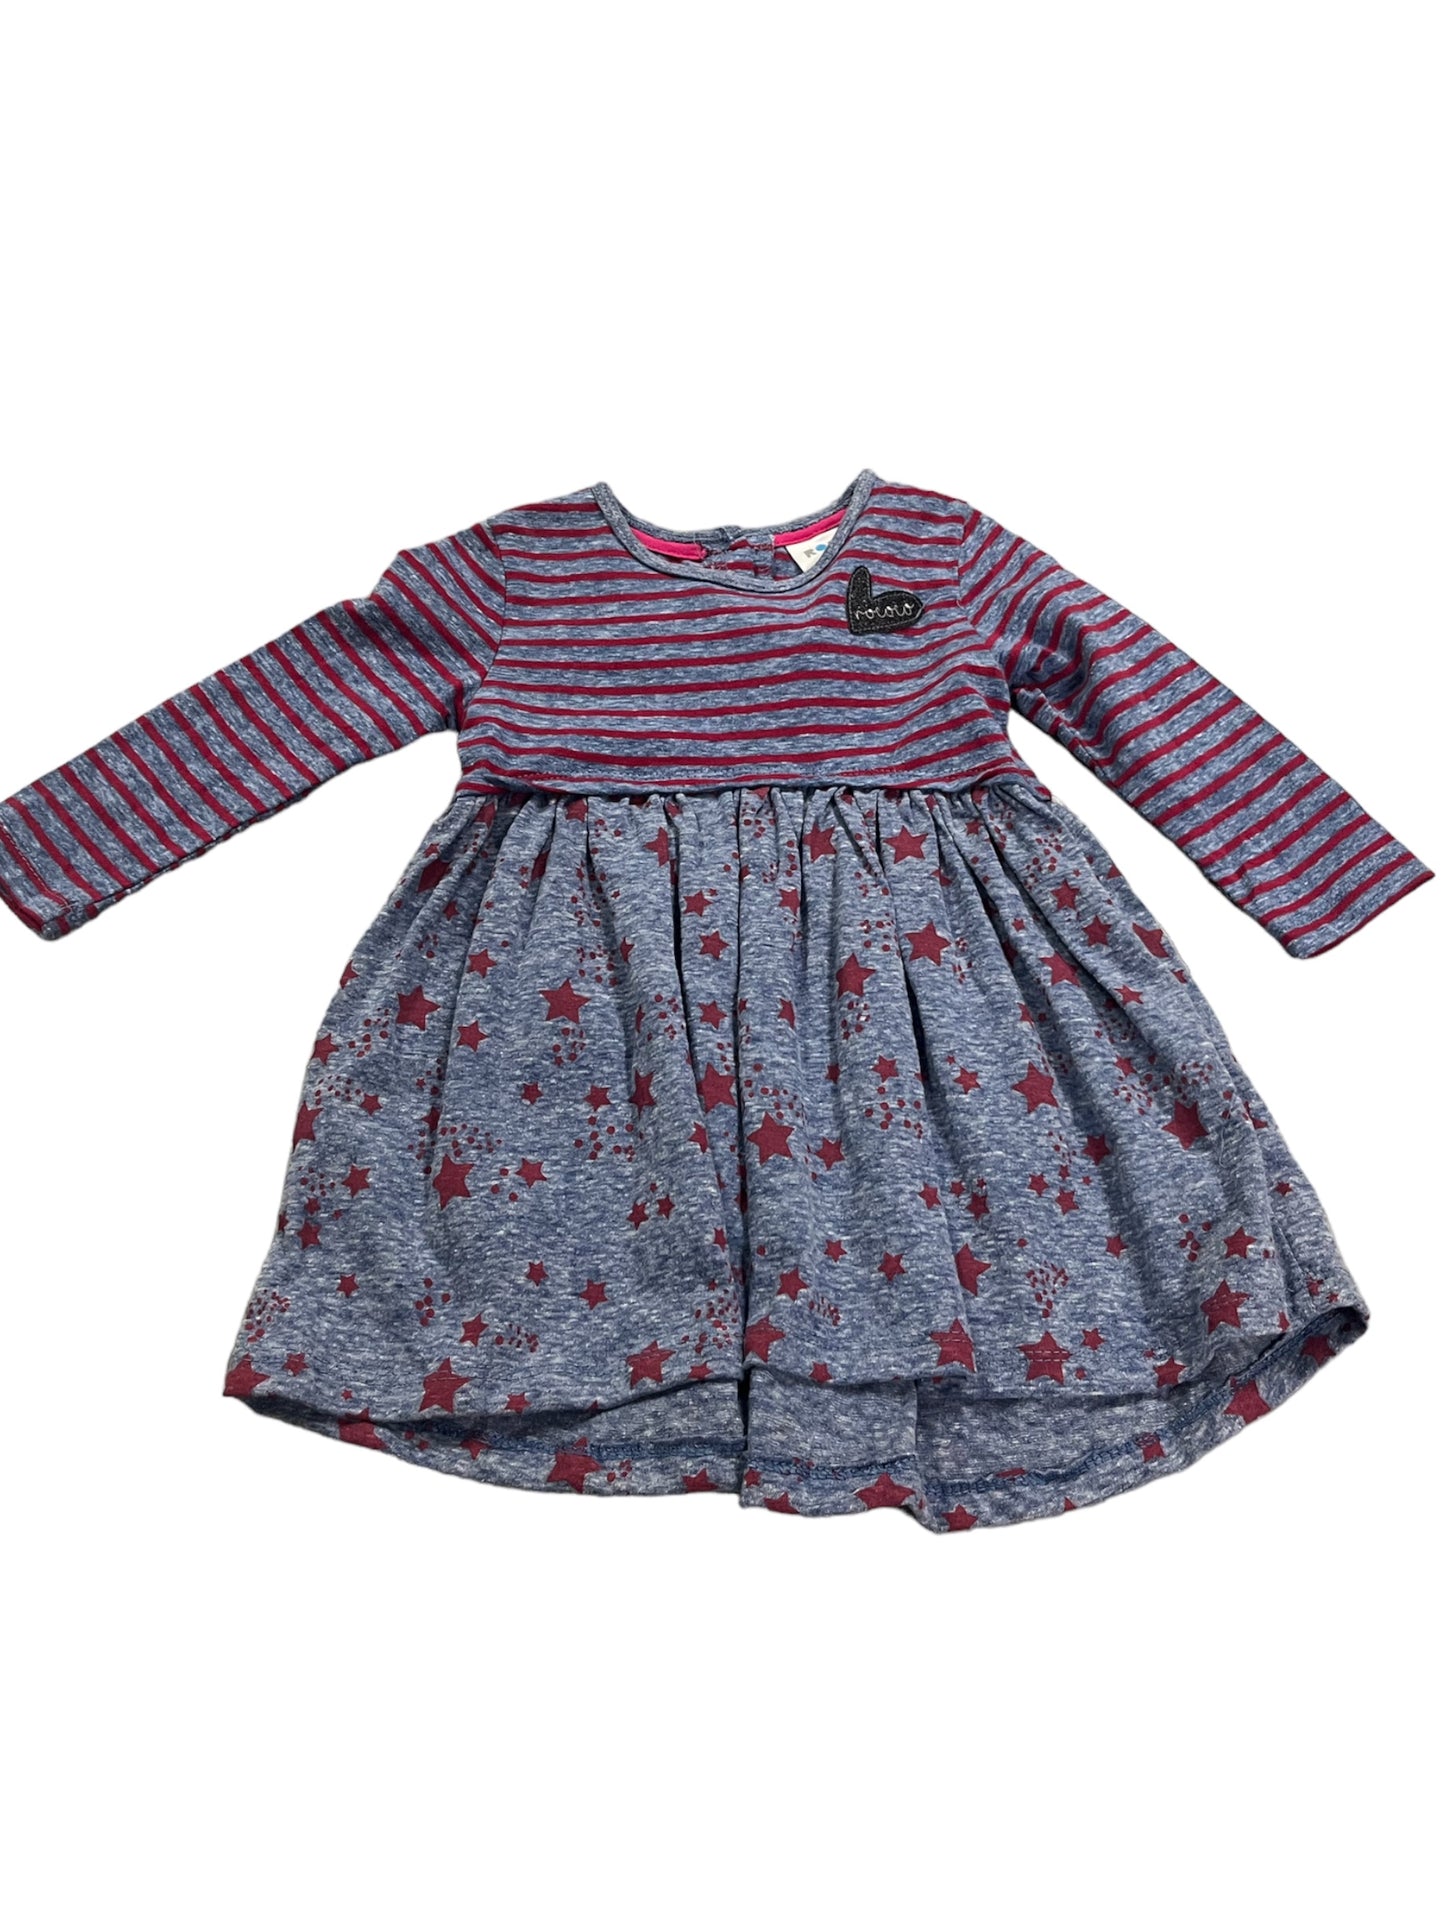 Red and Blue Dress Size 18m